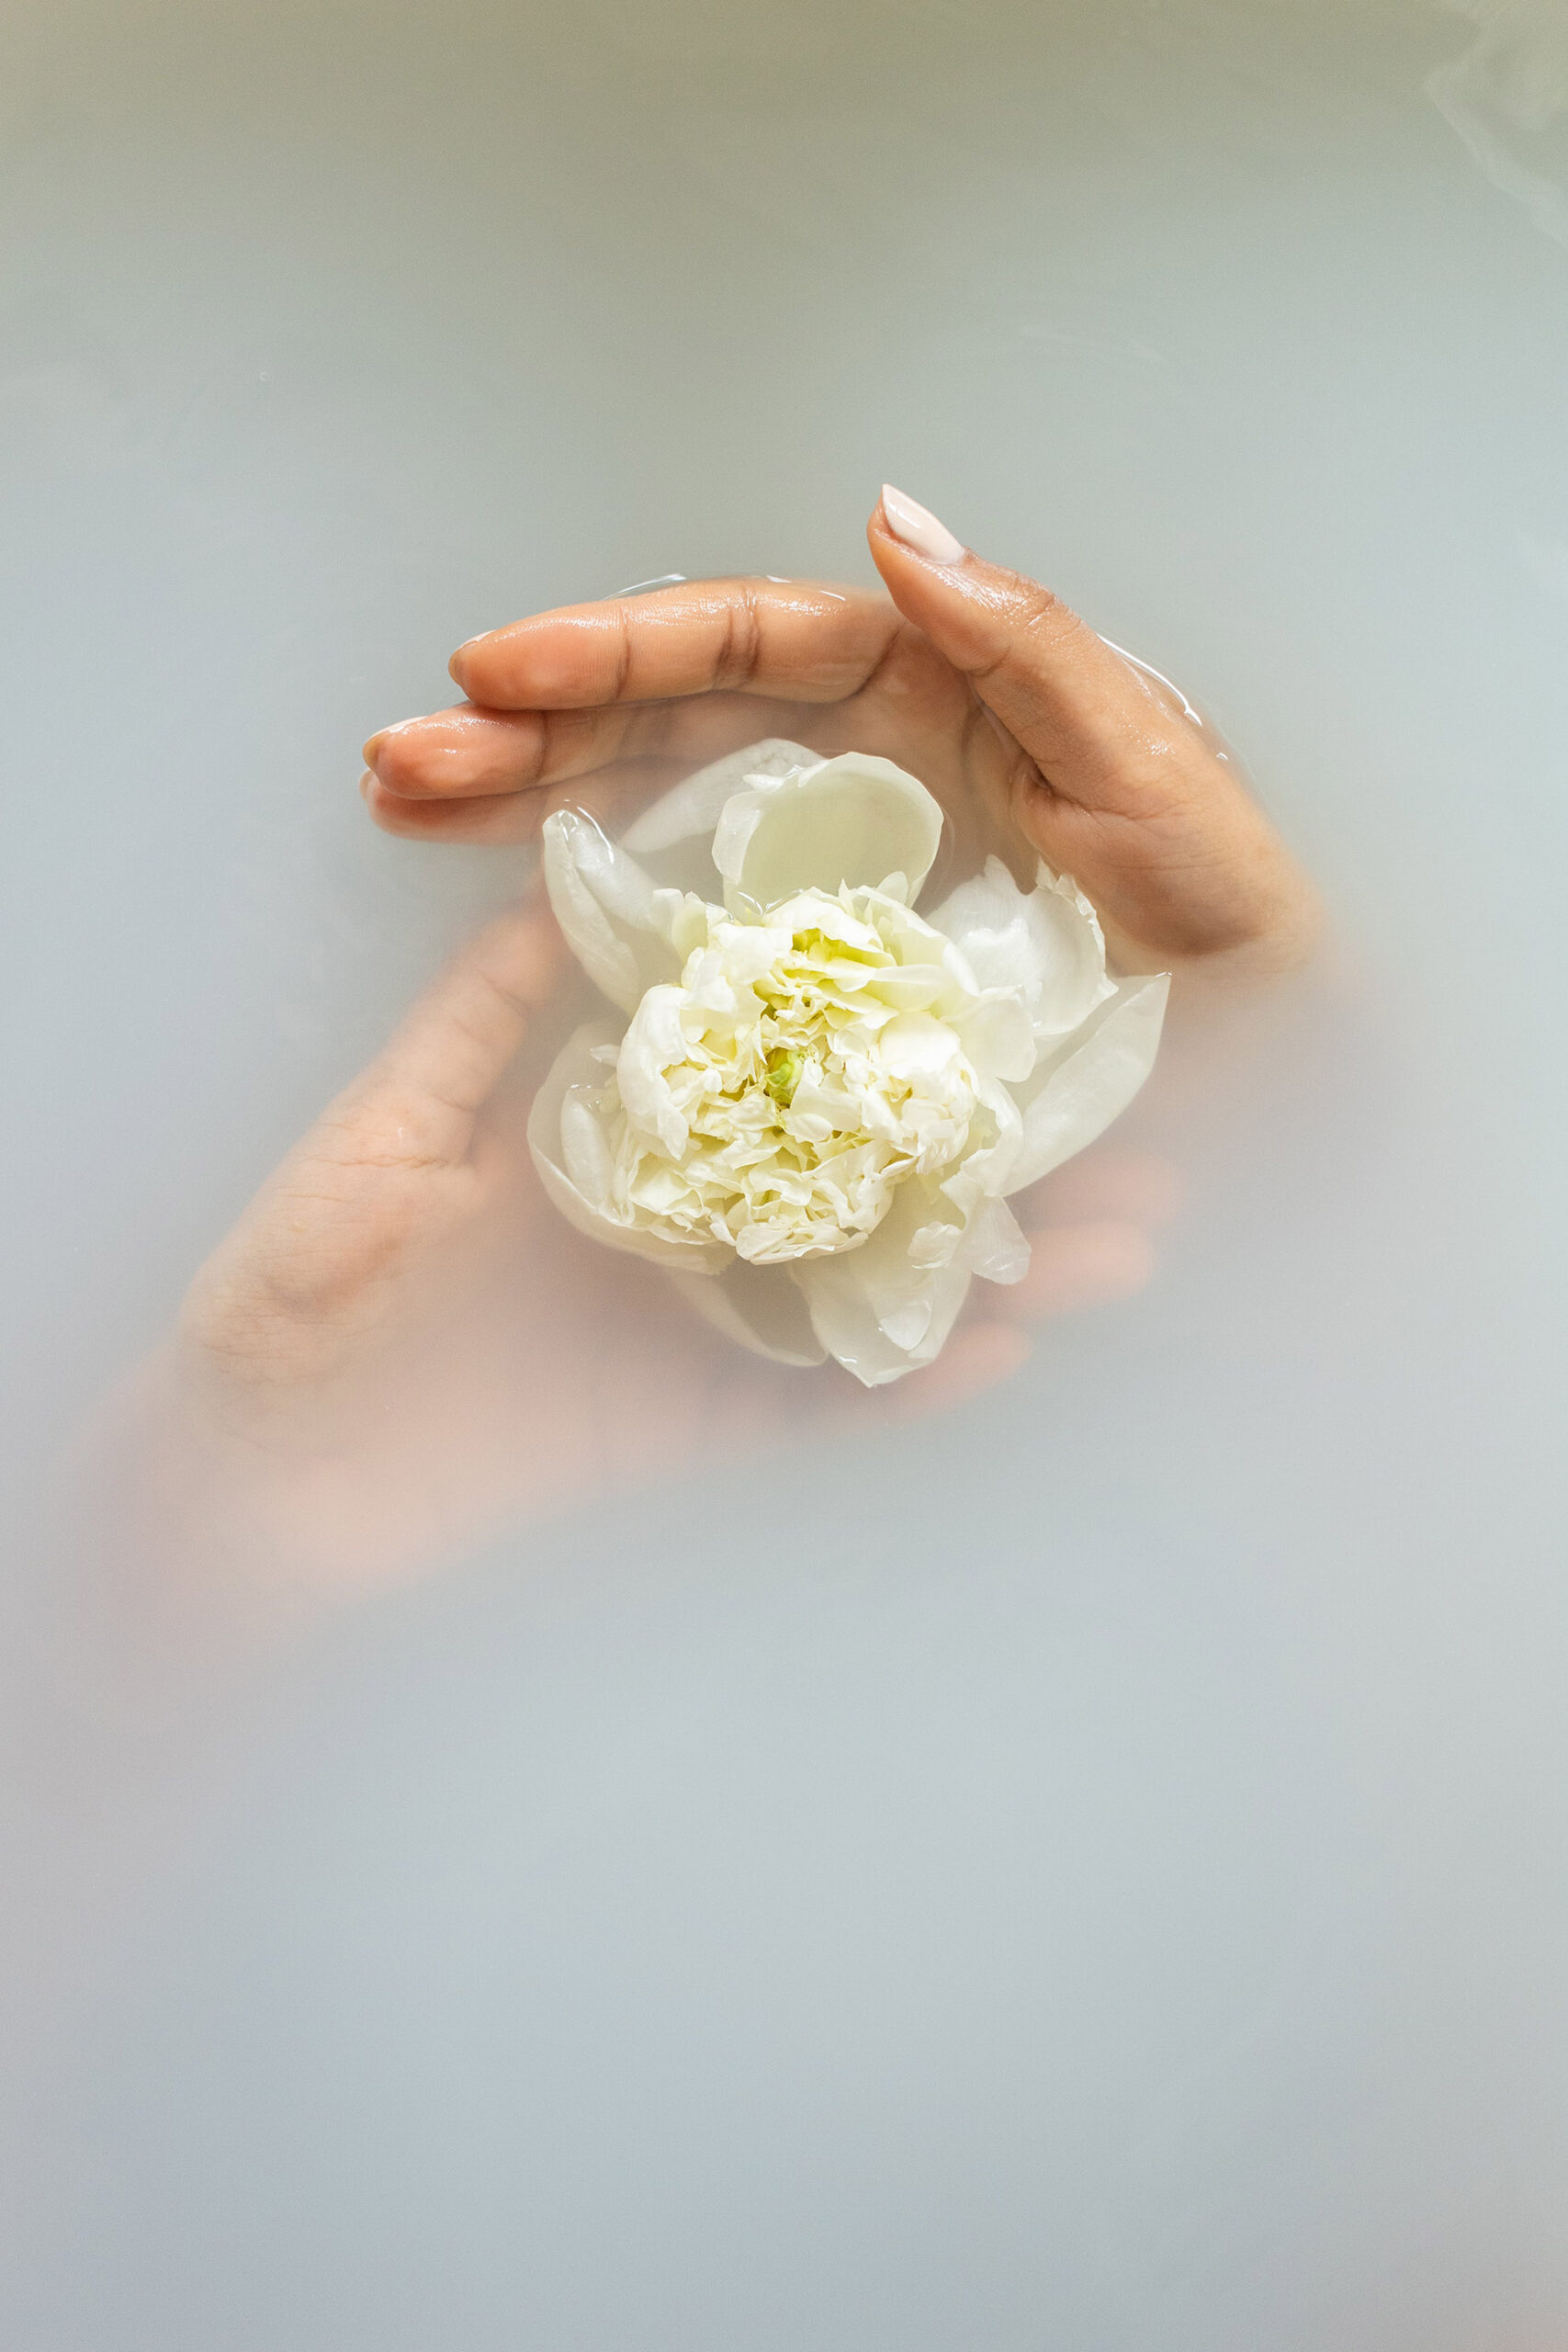 flower and hands in water